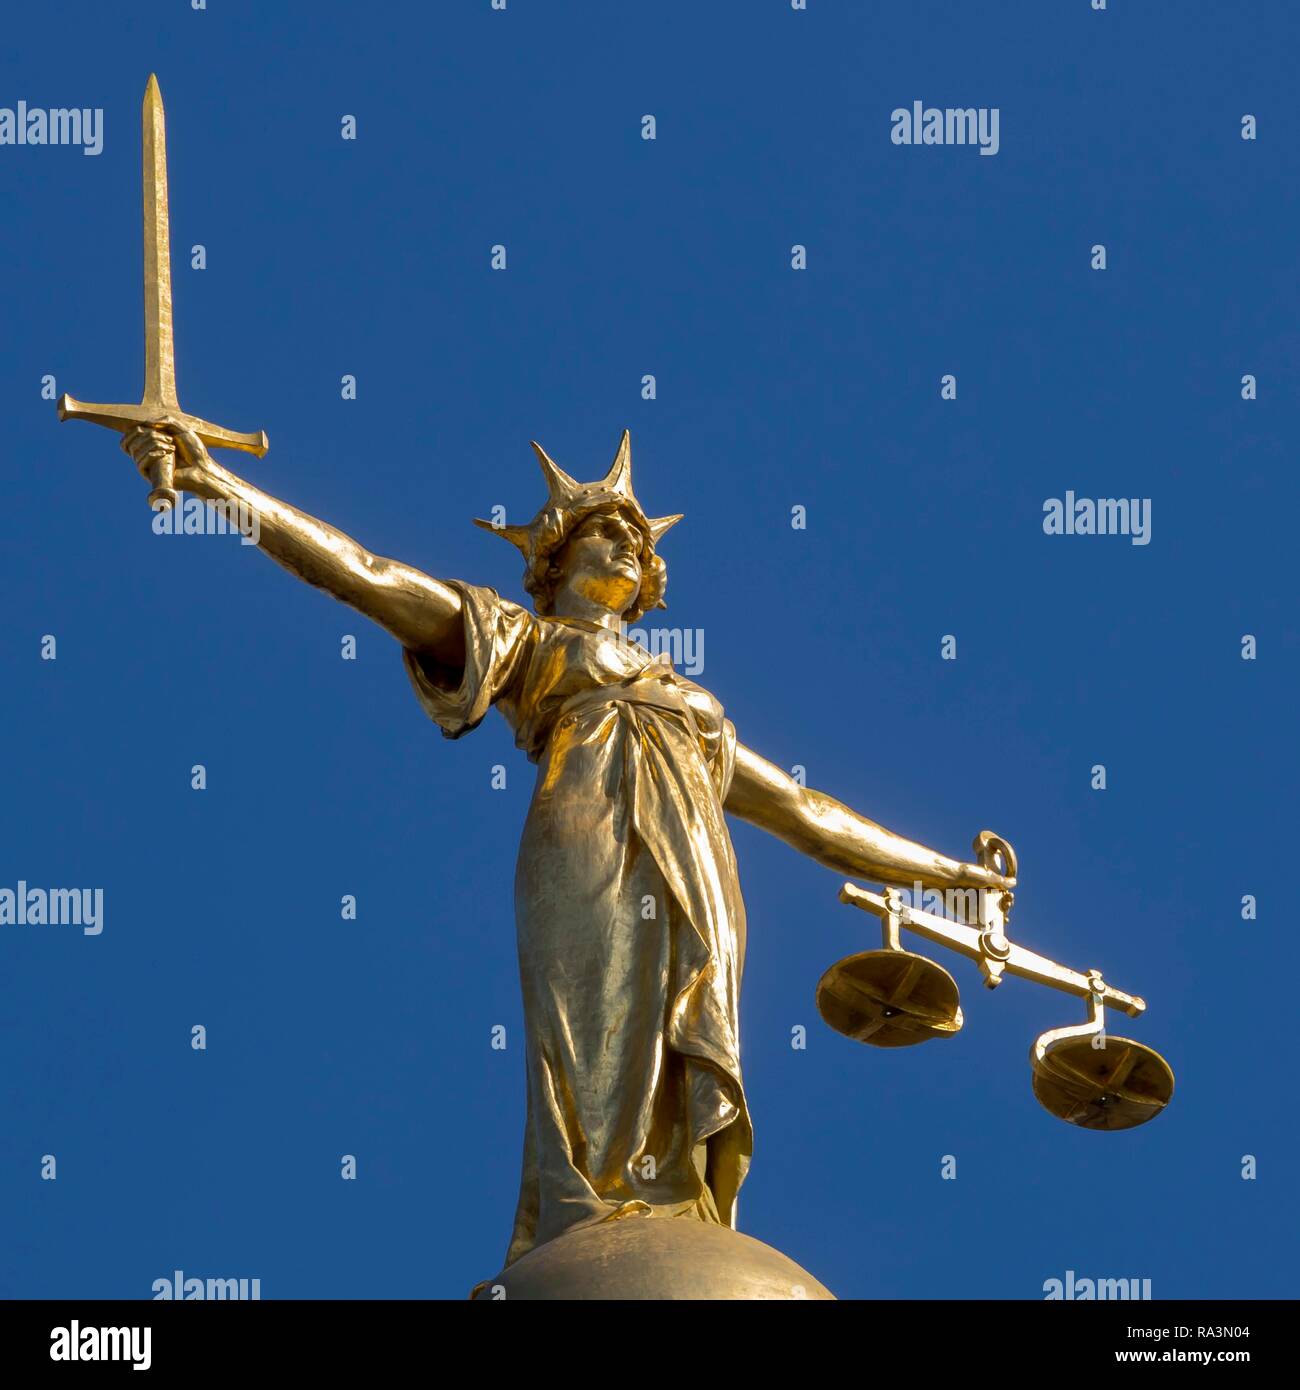 Statue of Justitia at Old Bailey, Central Criminal Court, Central Criminal Court, London, United Kingdom Stock Photo